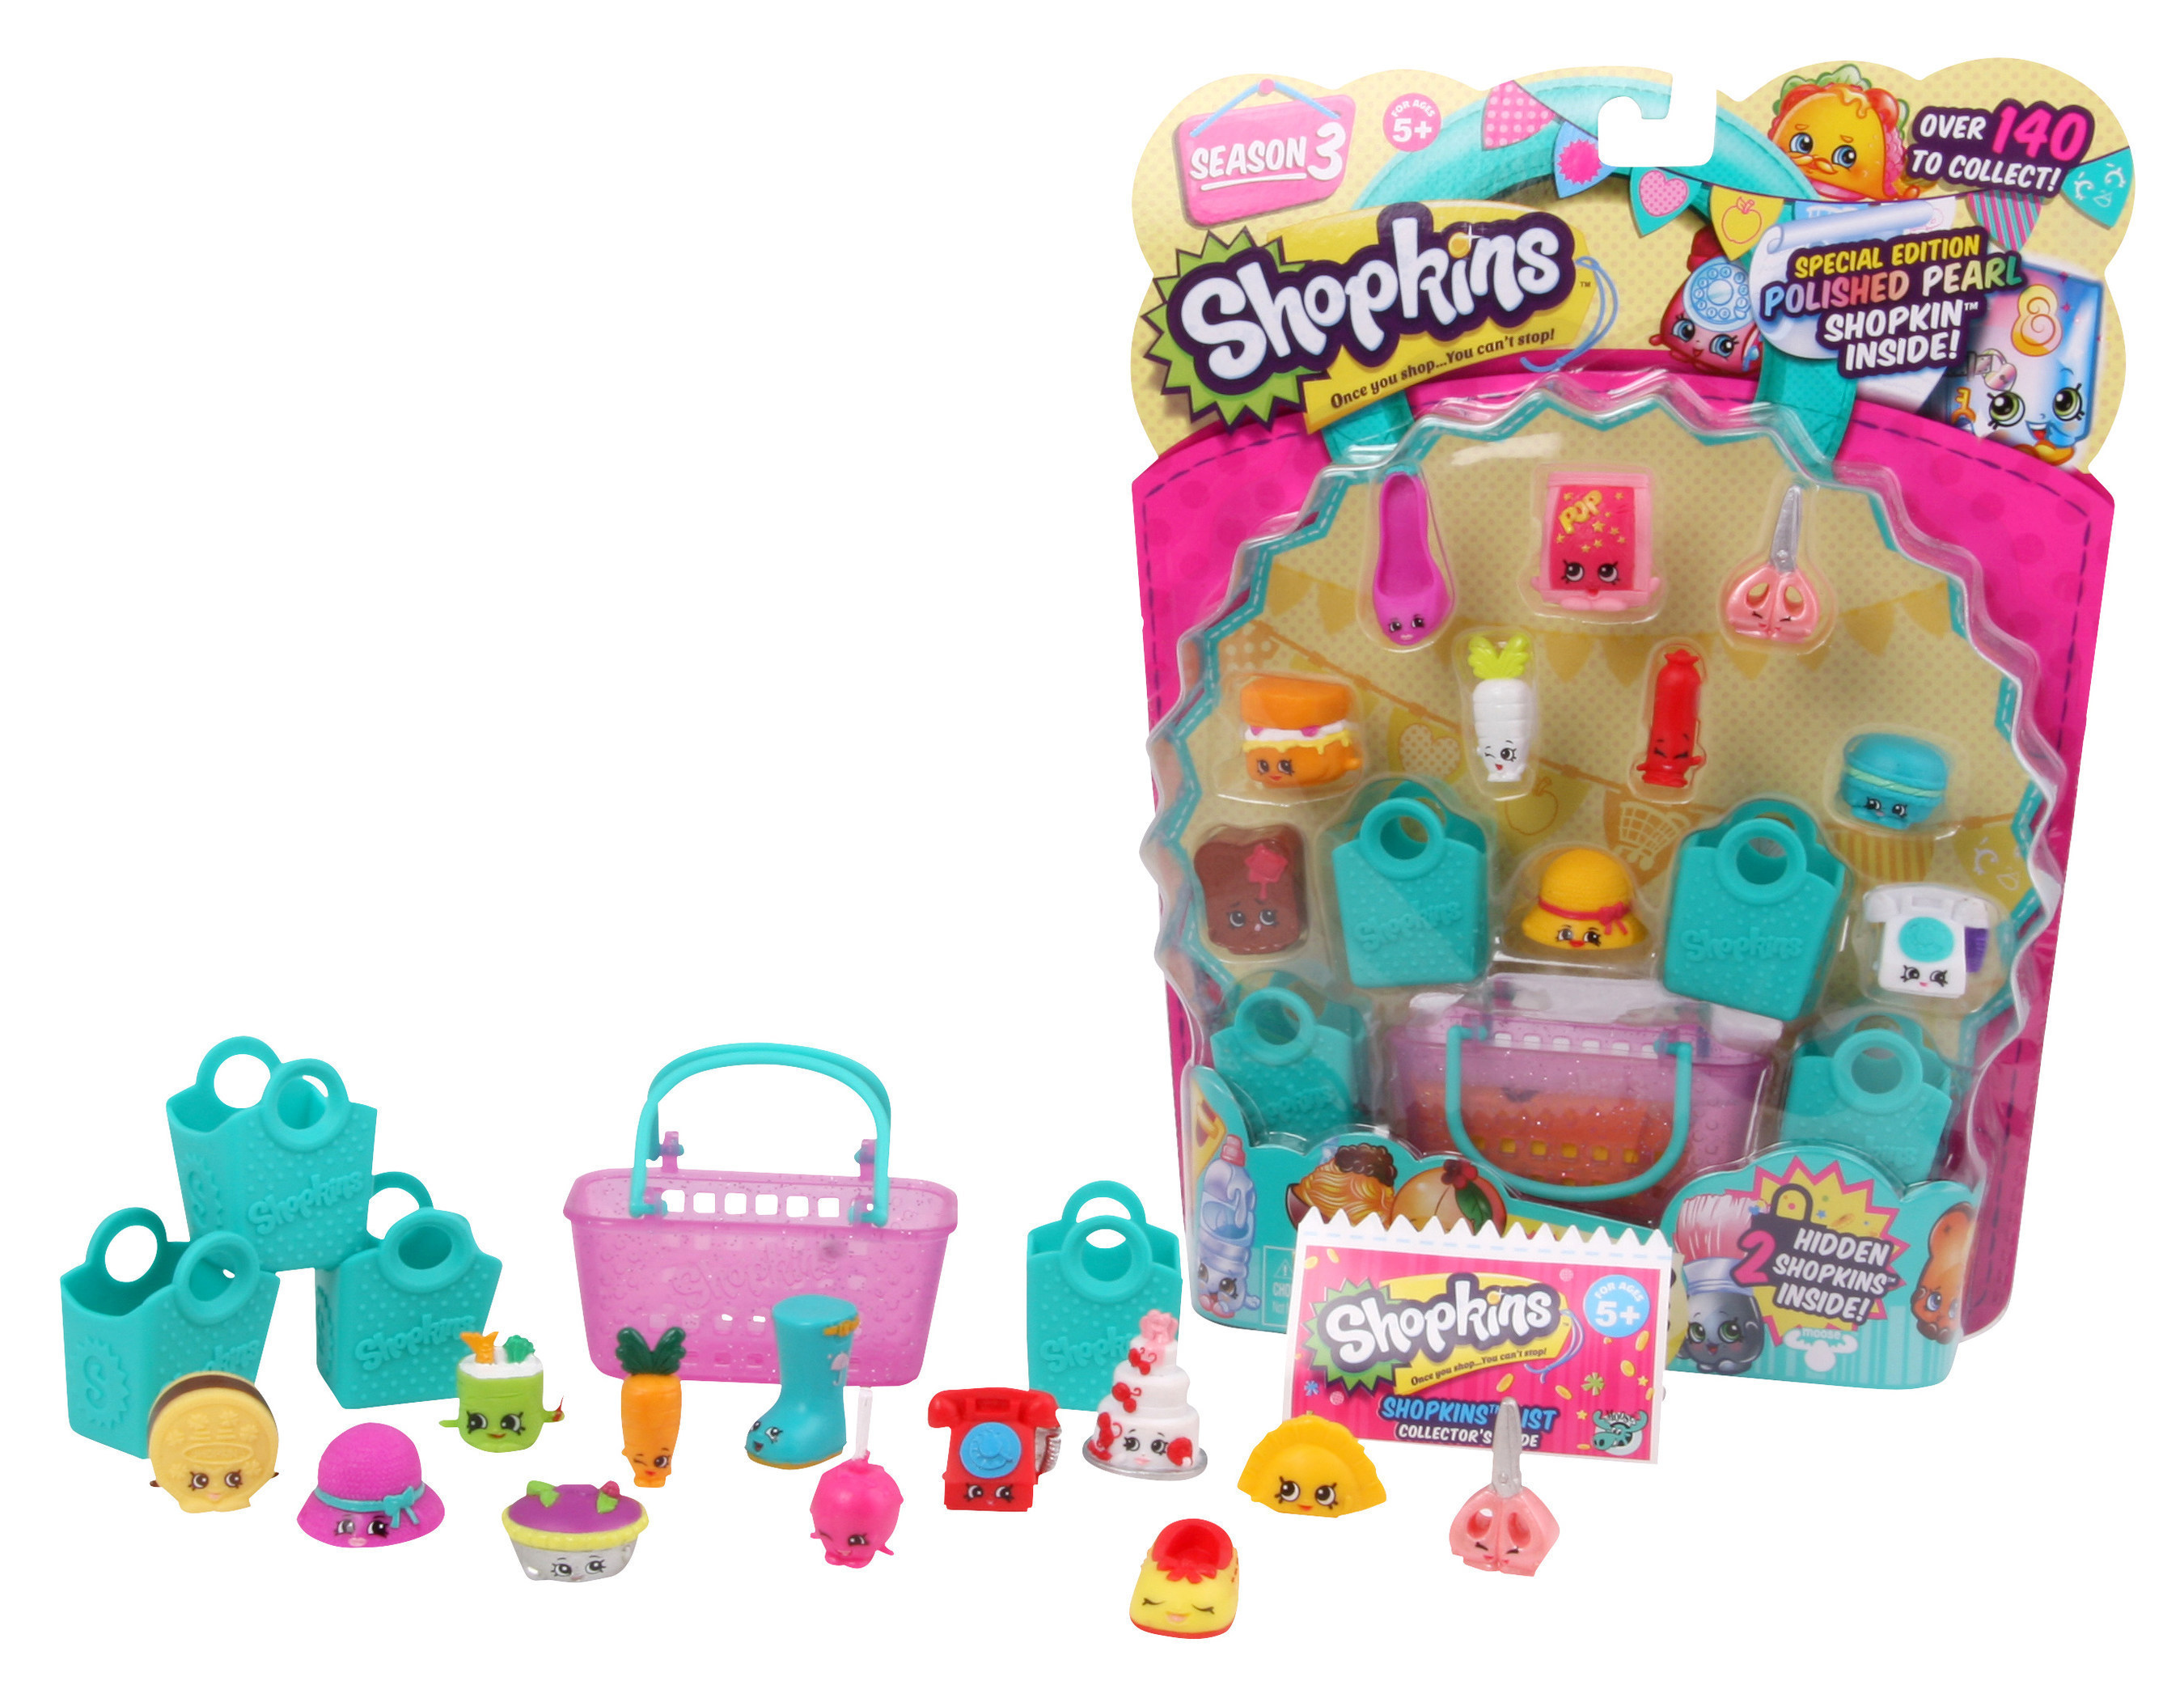 Moose Toys' Shopkins 12-Pack was the hottest selling toy of the year, according to The NPD Group Inc. / Retail Tracking Service. The biggest tiny toy brought a strong force to retail sales in 2015, beating toys from major movies and television shows.